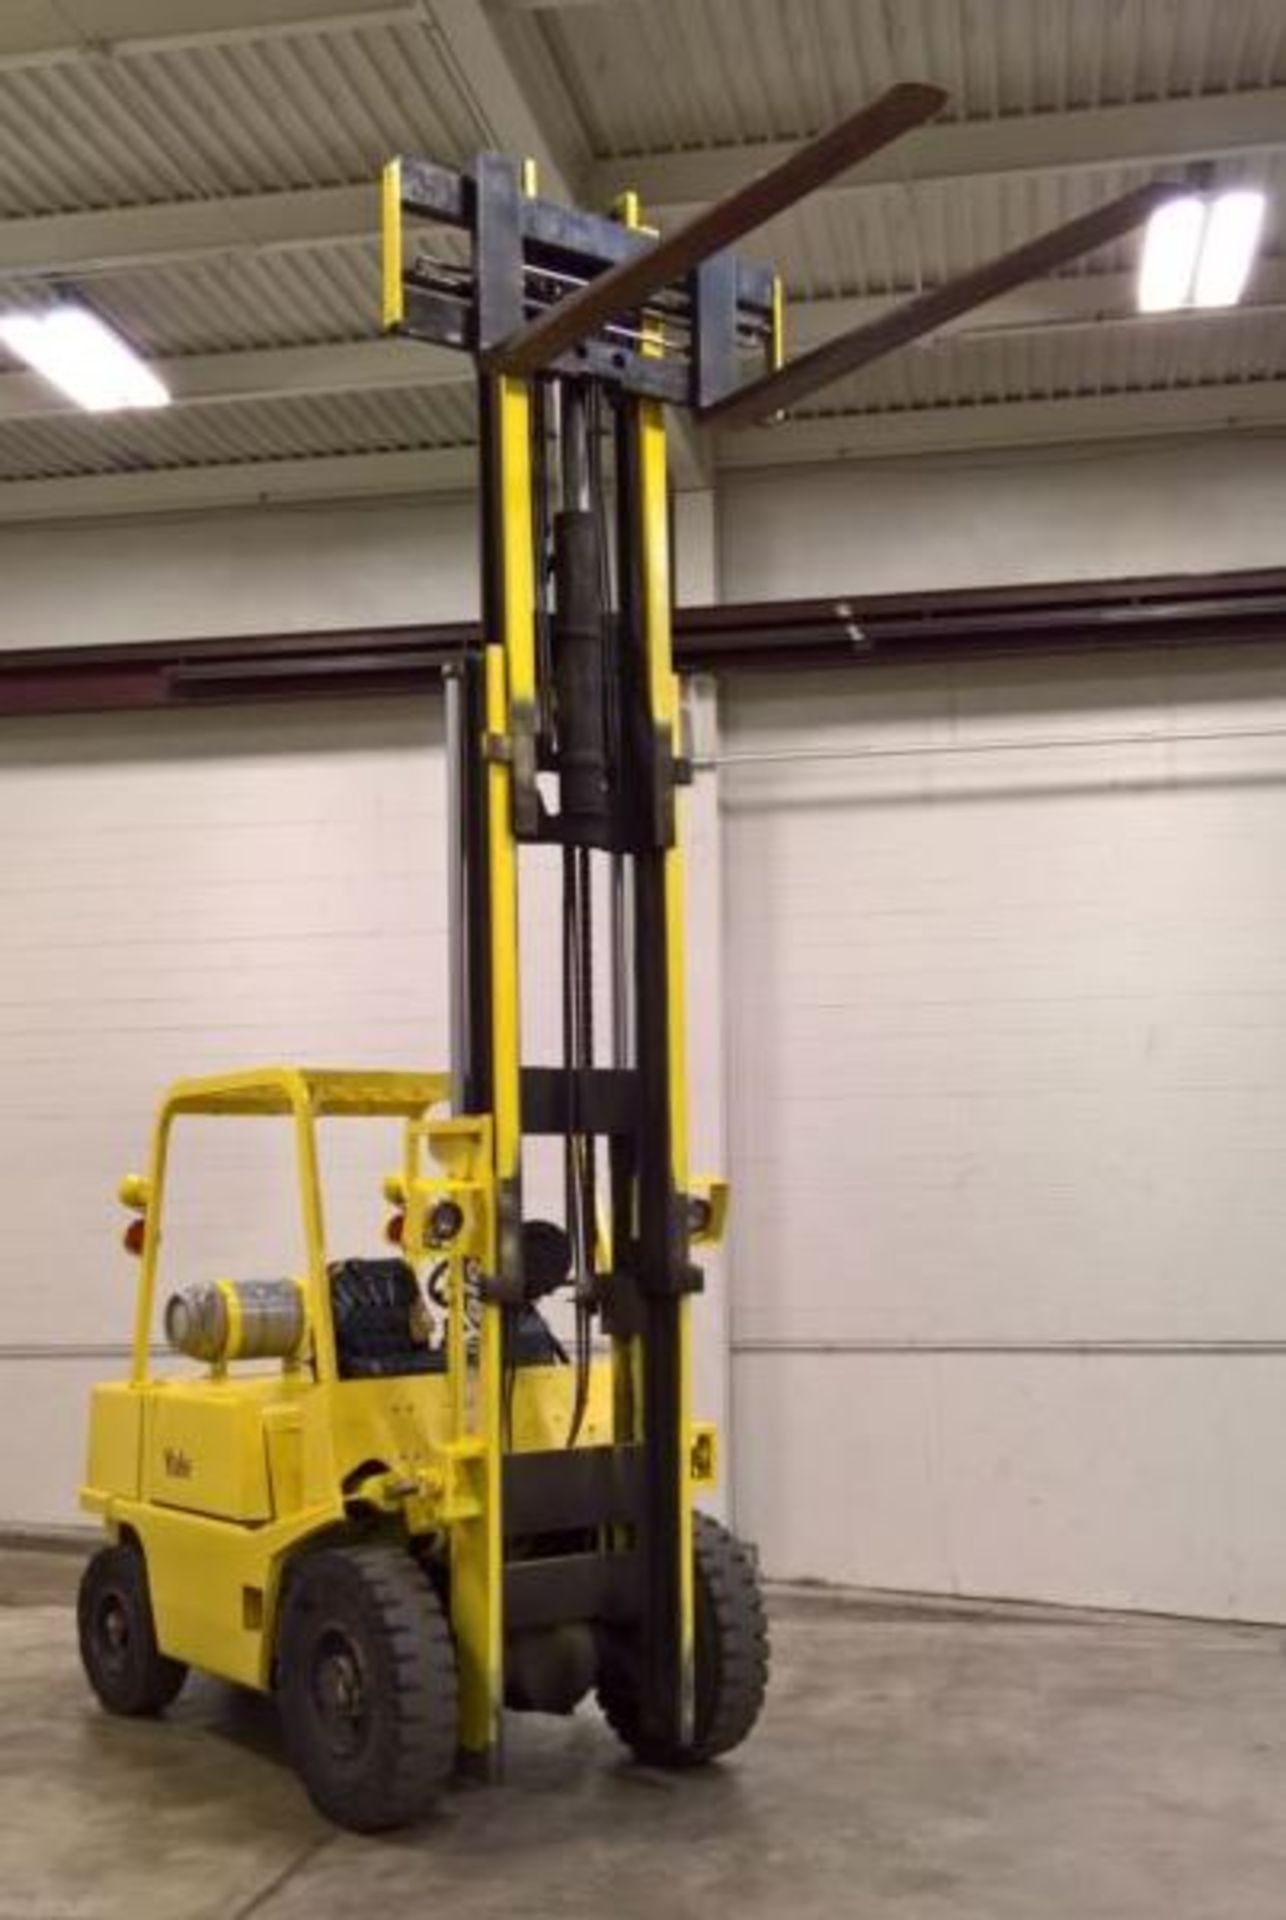 YALE MDL. GLP080LCNSBE083 (LPG) FORK TRUCK, 8000# MAX LIFTING CAPACITY, 170” MAX LIFT HEIGHT - Image 2 of 8